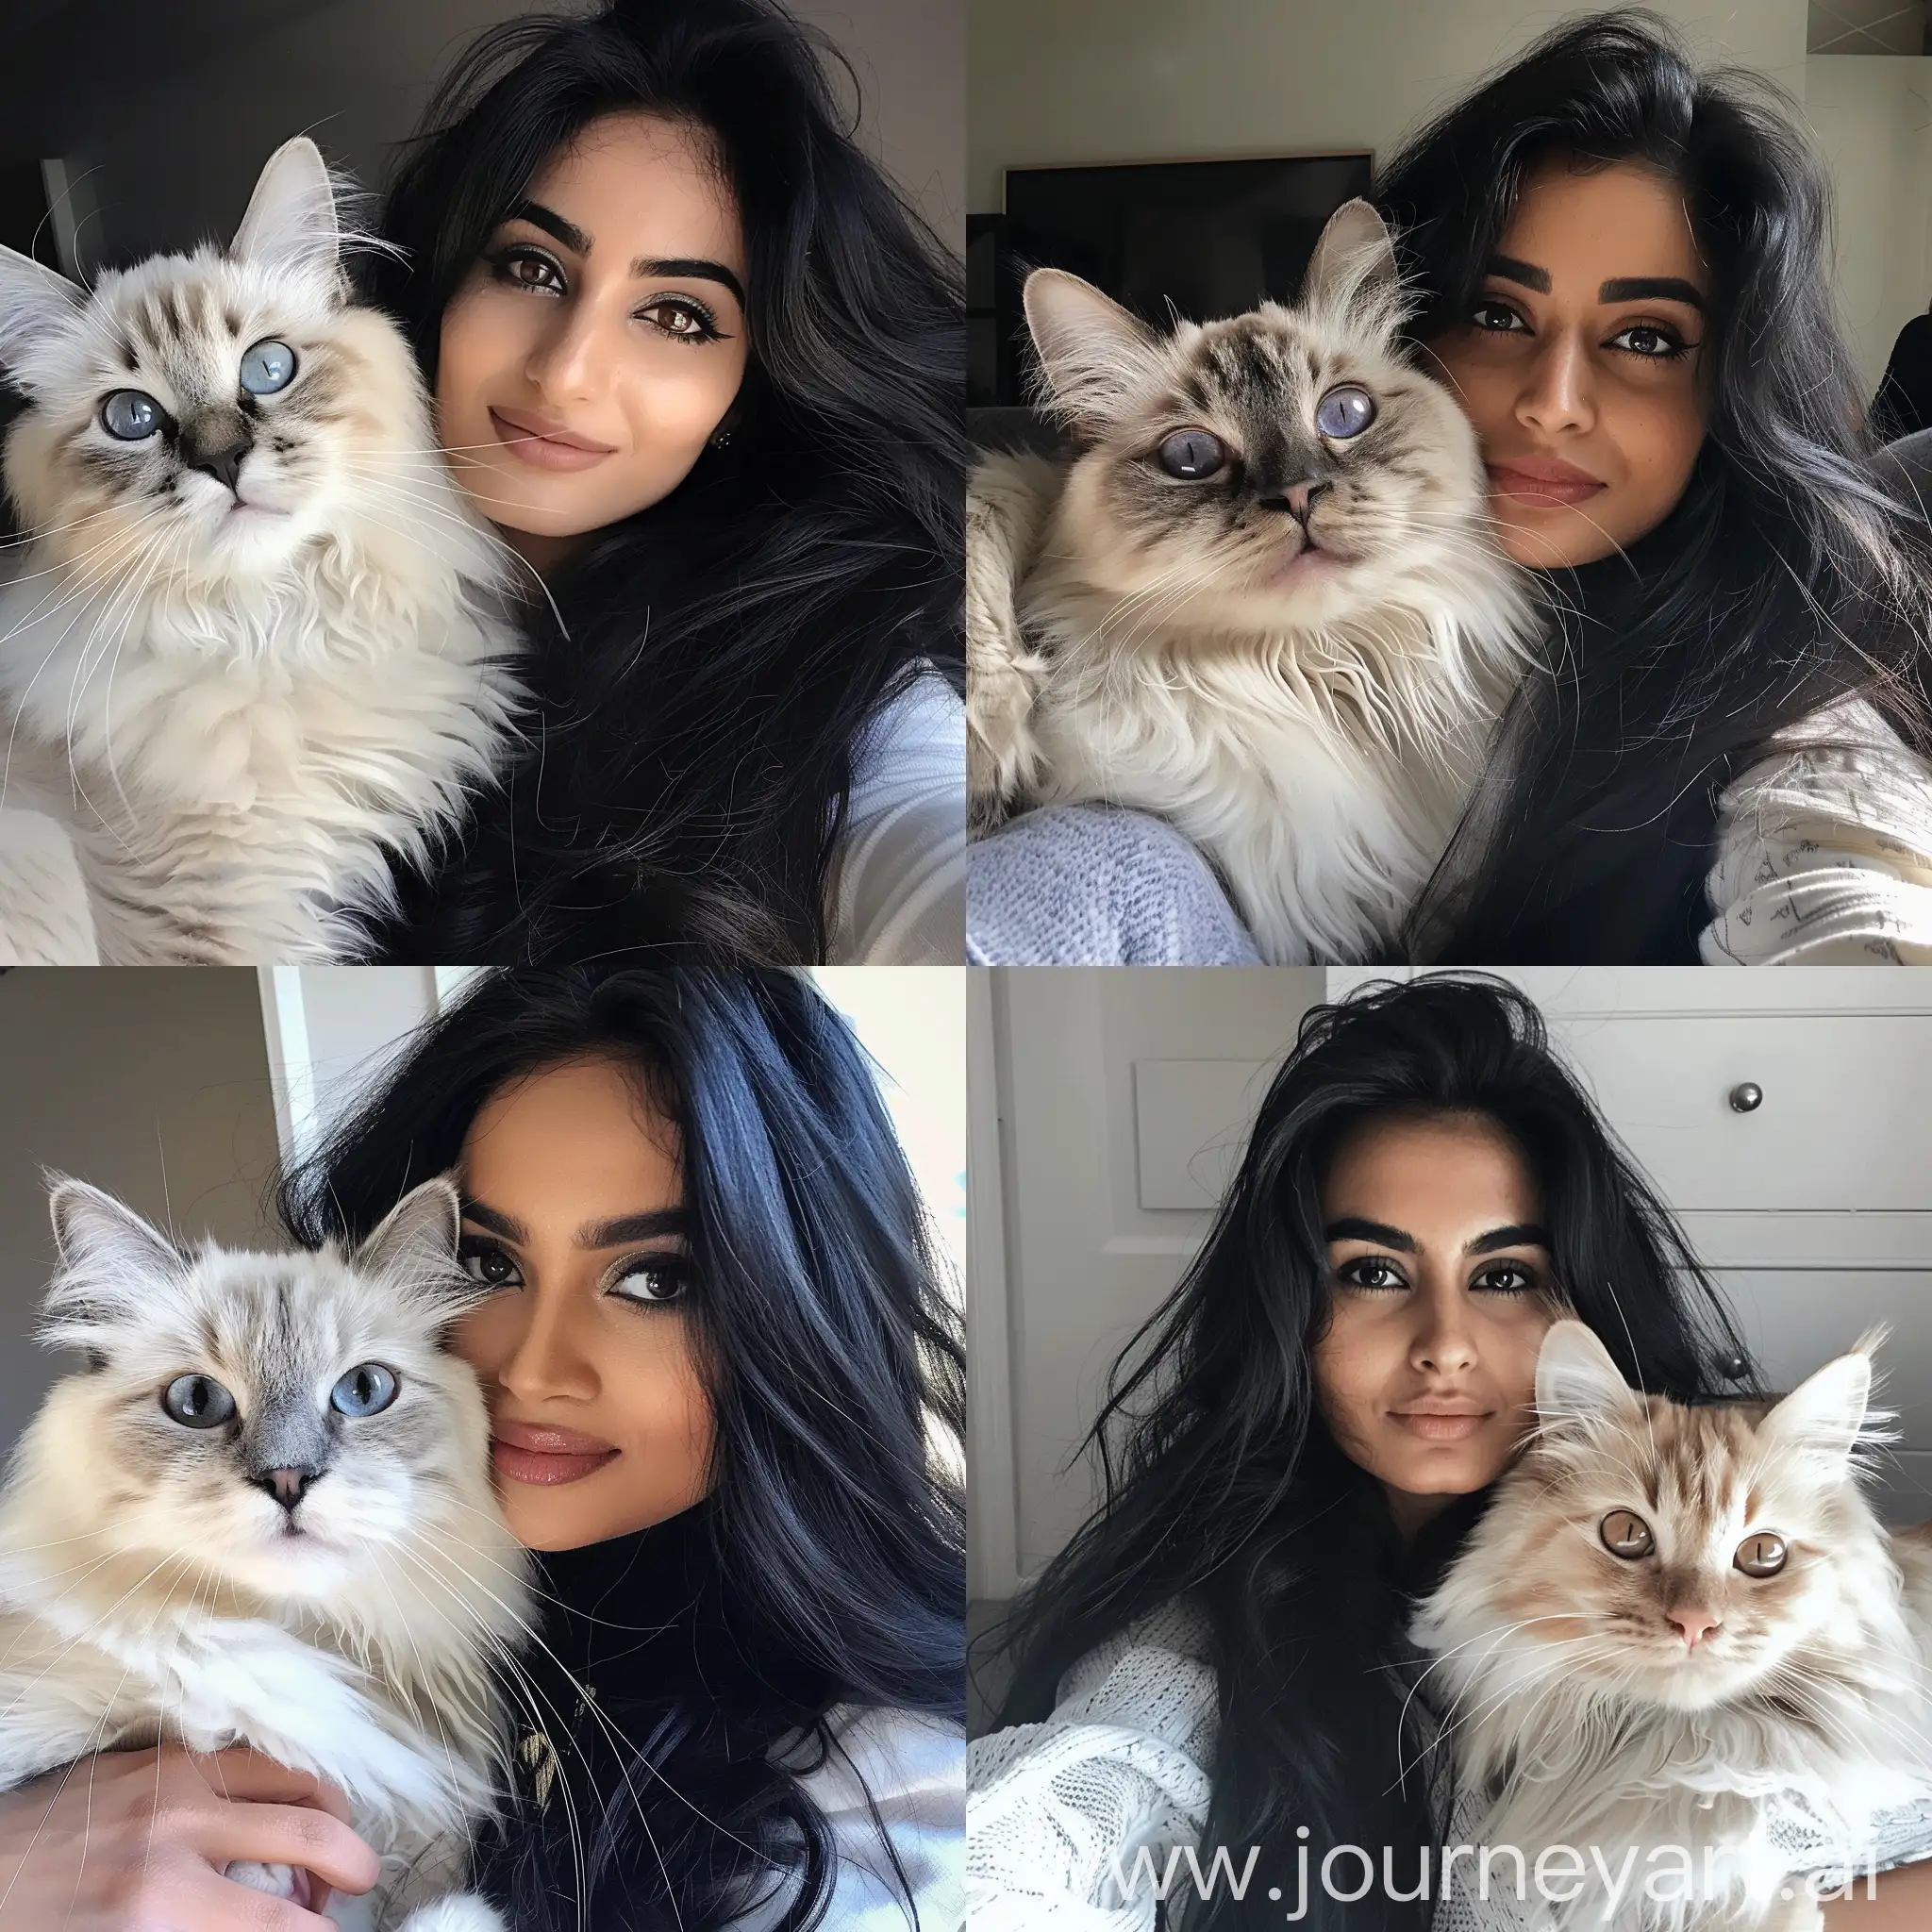 A beautiful british Pakistani women with long black hair taking selfie with a dark face and white body ragdoll cat--v 6